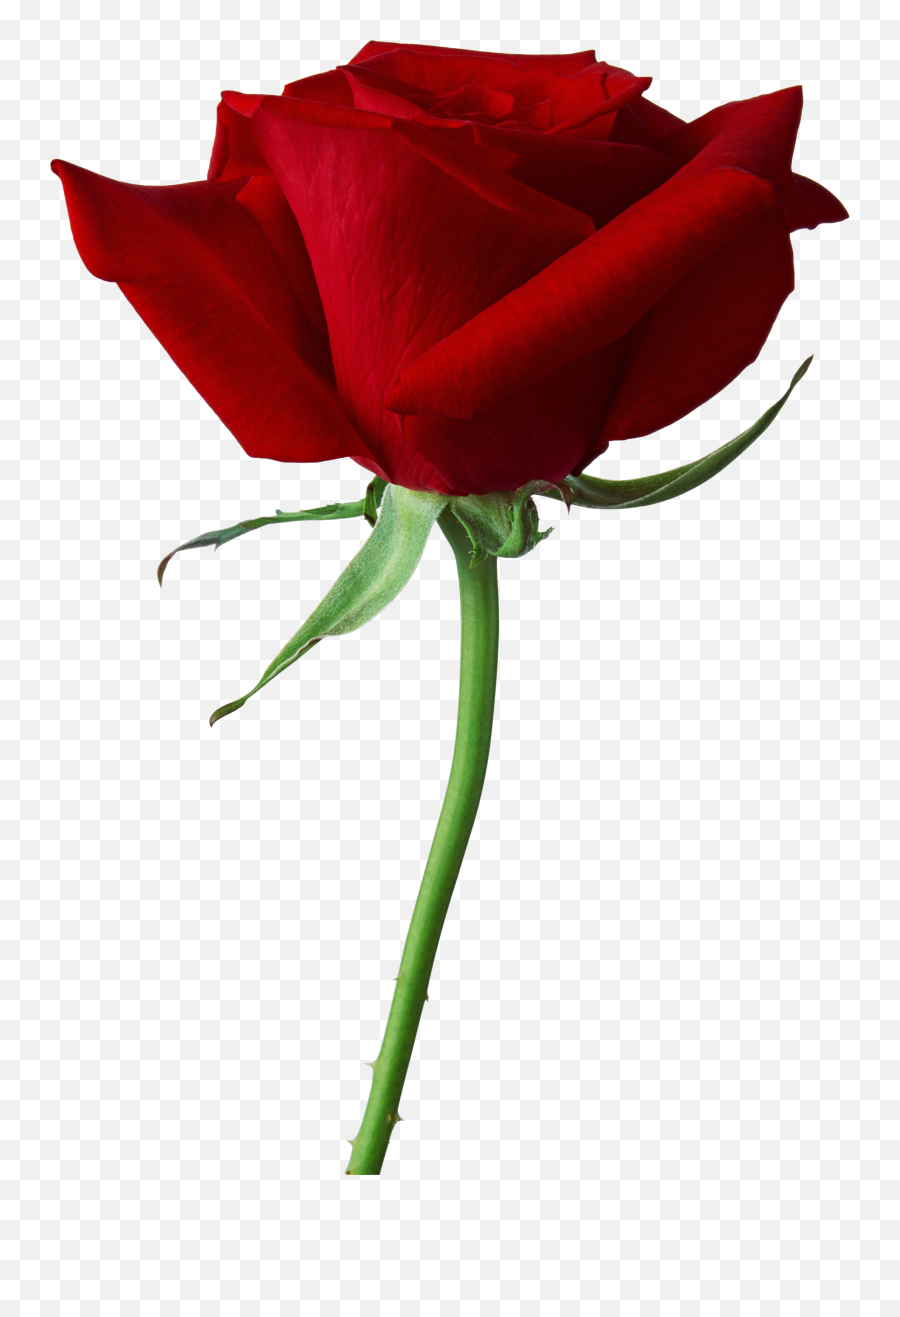 Red Rose Png Image - Rose In Png Format,Red Rose Png